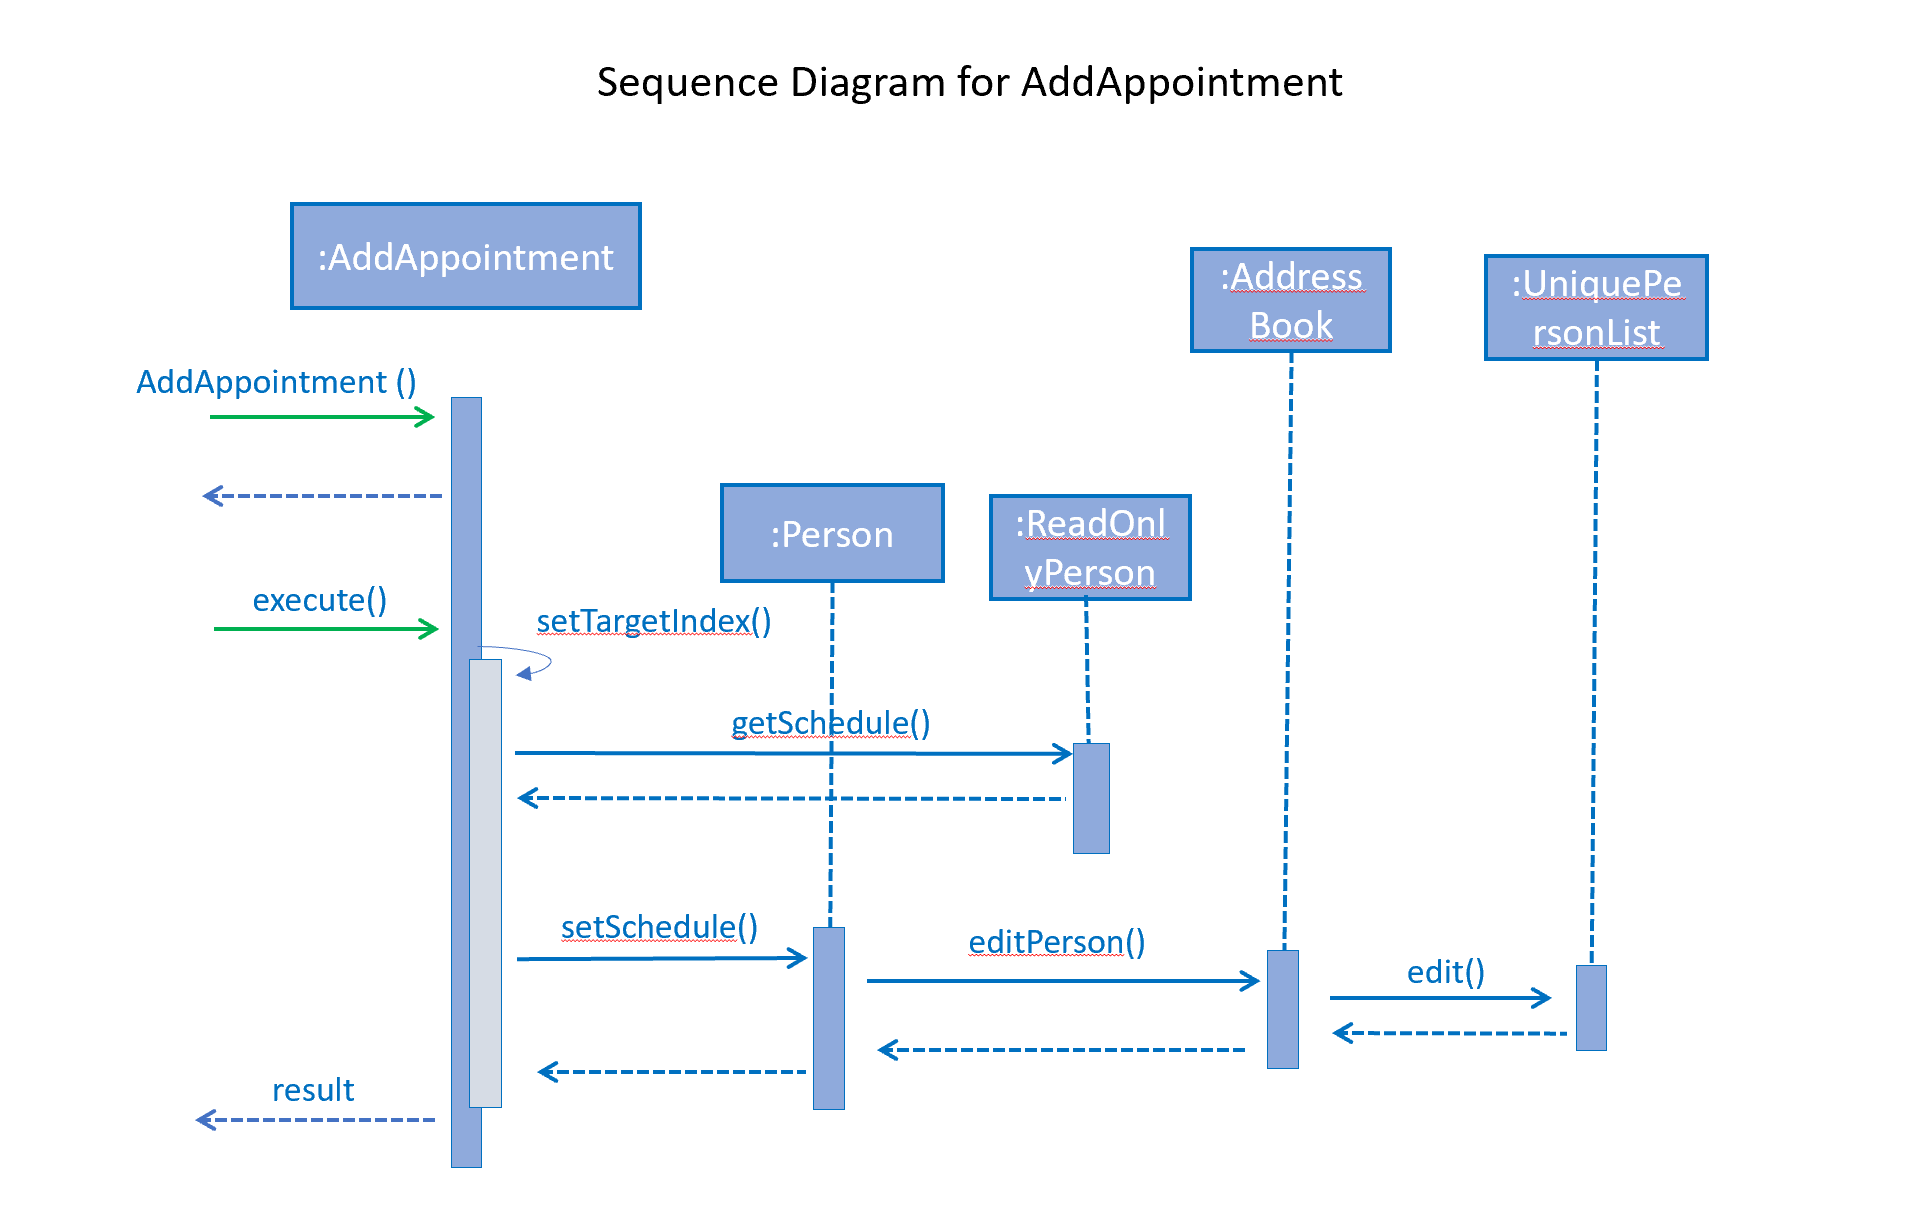 AddAppointmentSequenceDiagram